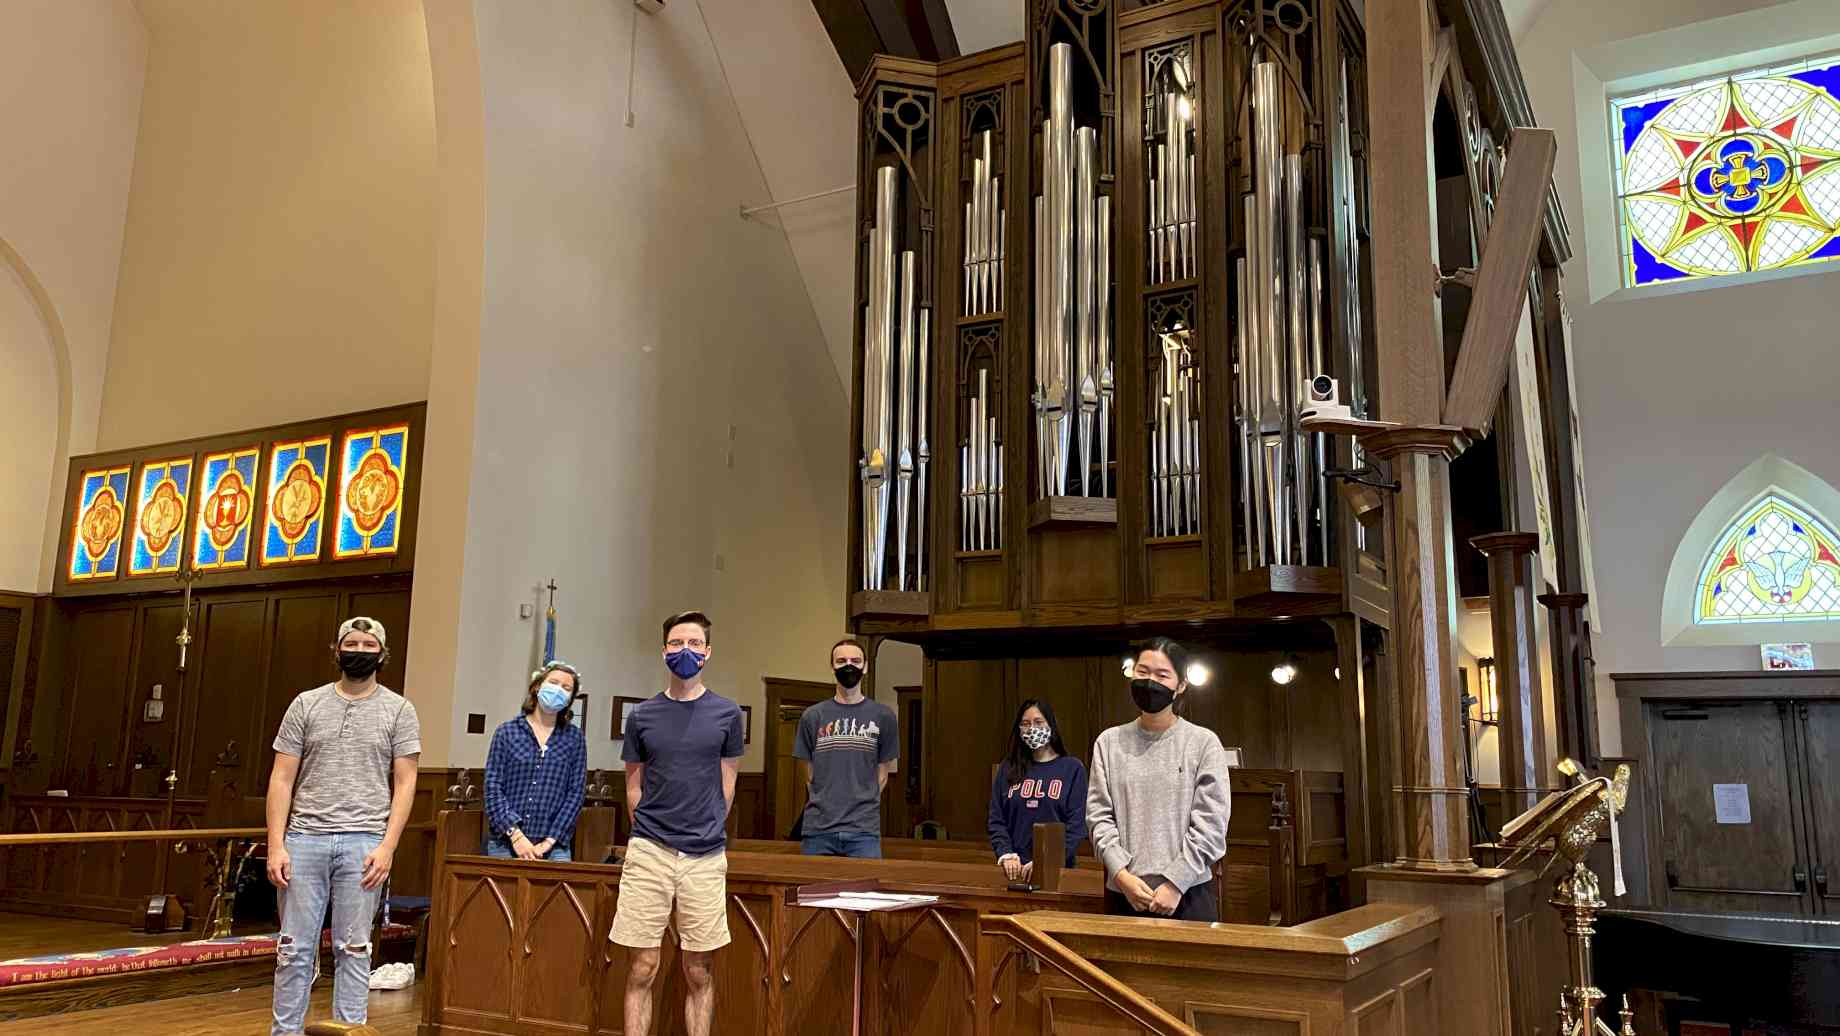 Members of the Spring 2021 UF Organ Studio visit Holy Trinity Episcopal Church, Gainesville